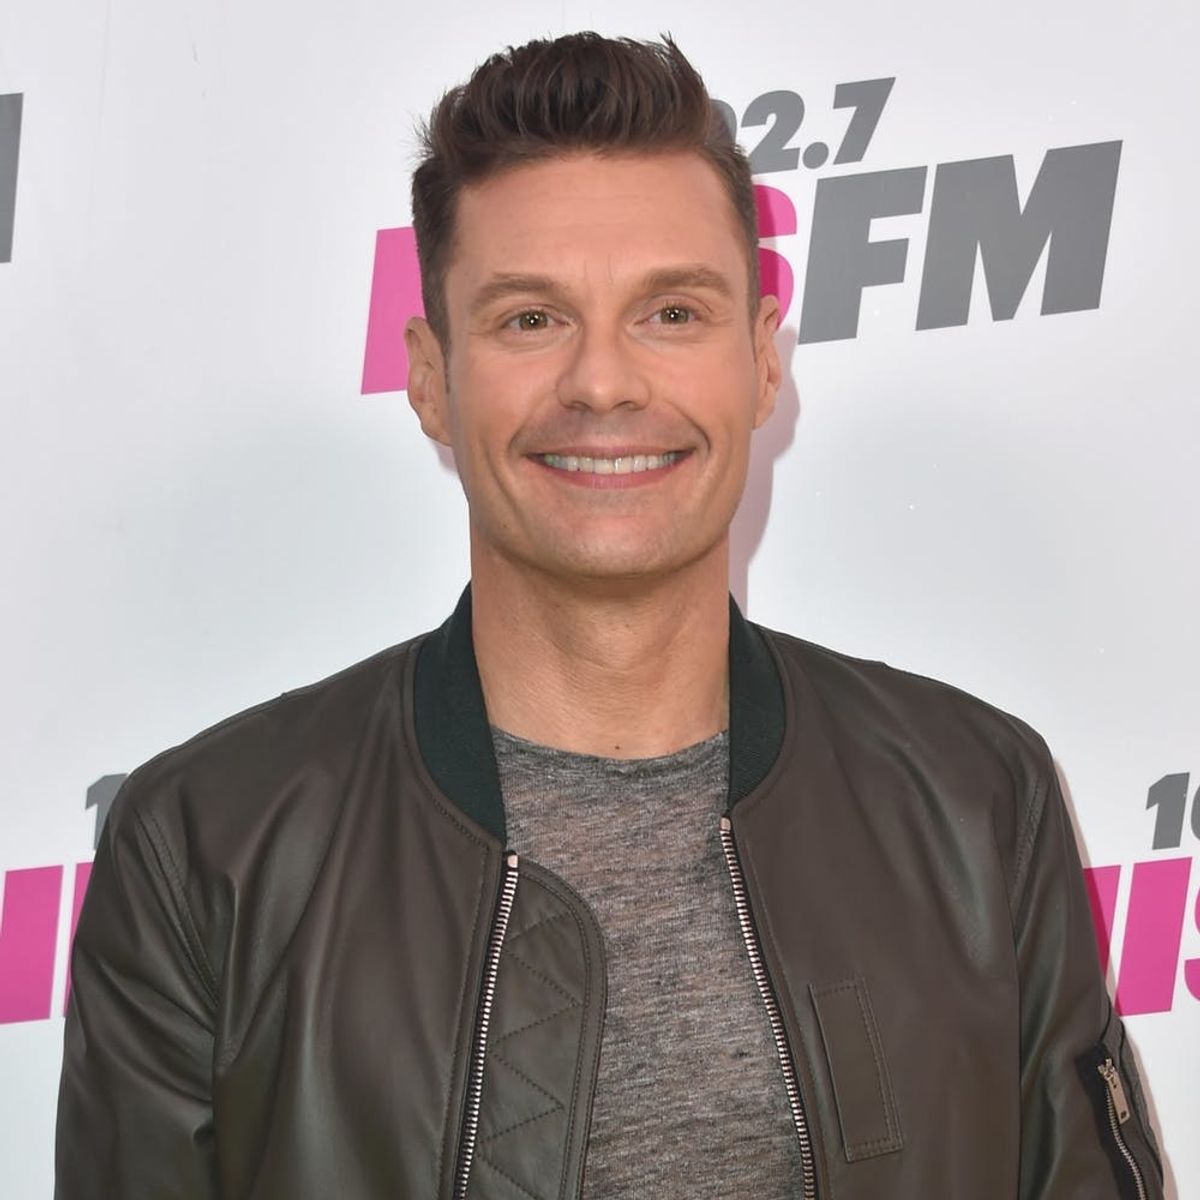 Ryan Seacrest Texted Kris Jenner to Ask About the Kylie Pregnancy Reports on Live TV